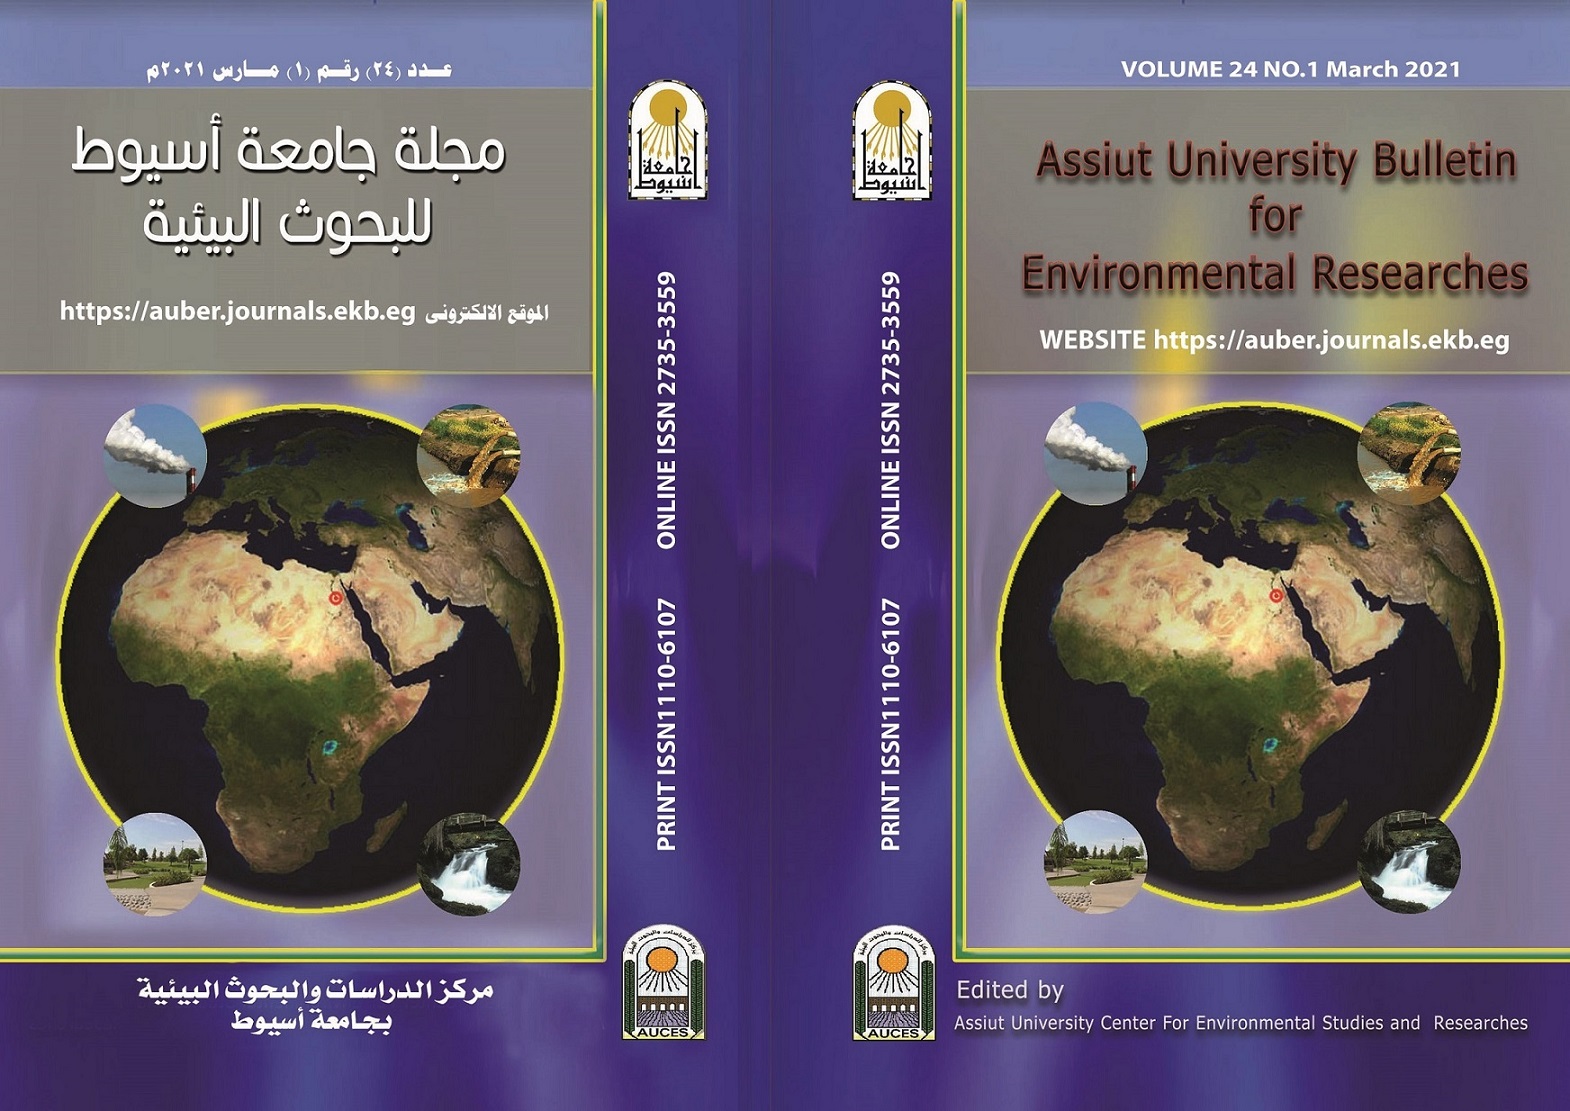 Assiut University Bulletin for Environmental Researches